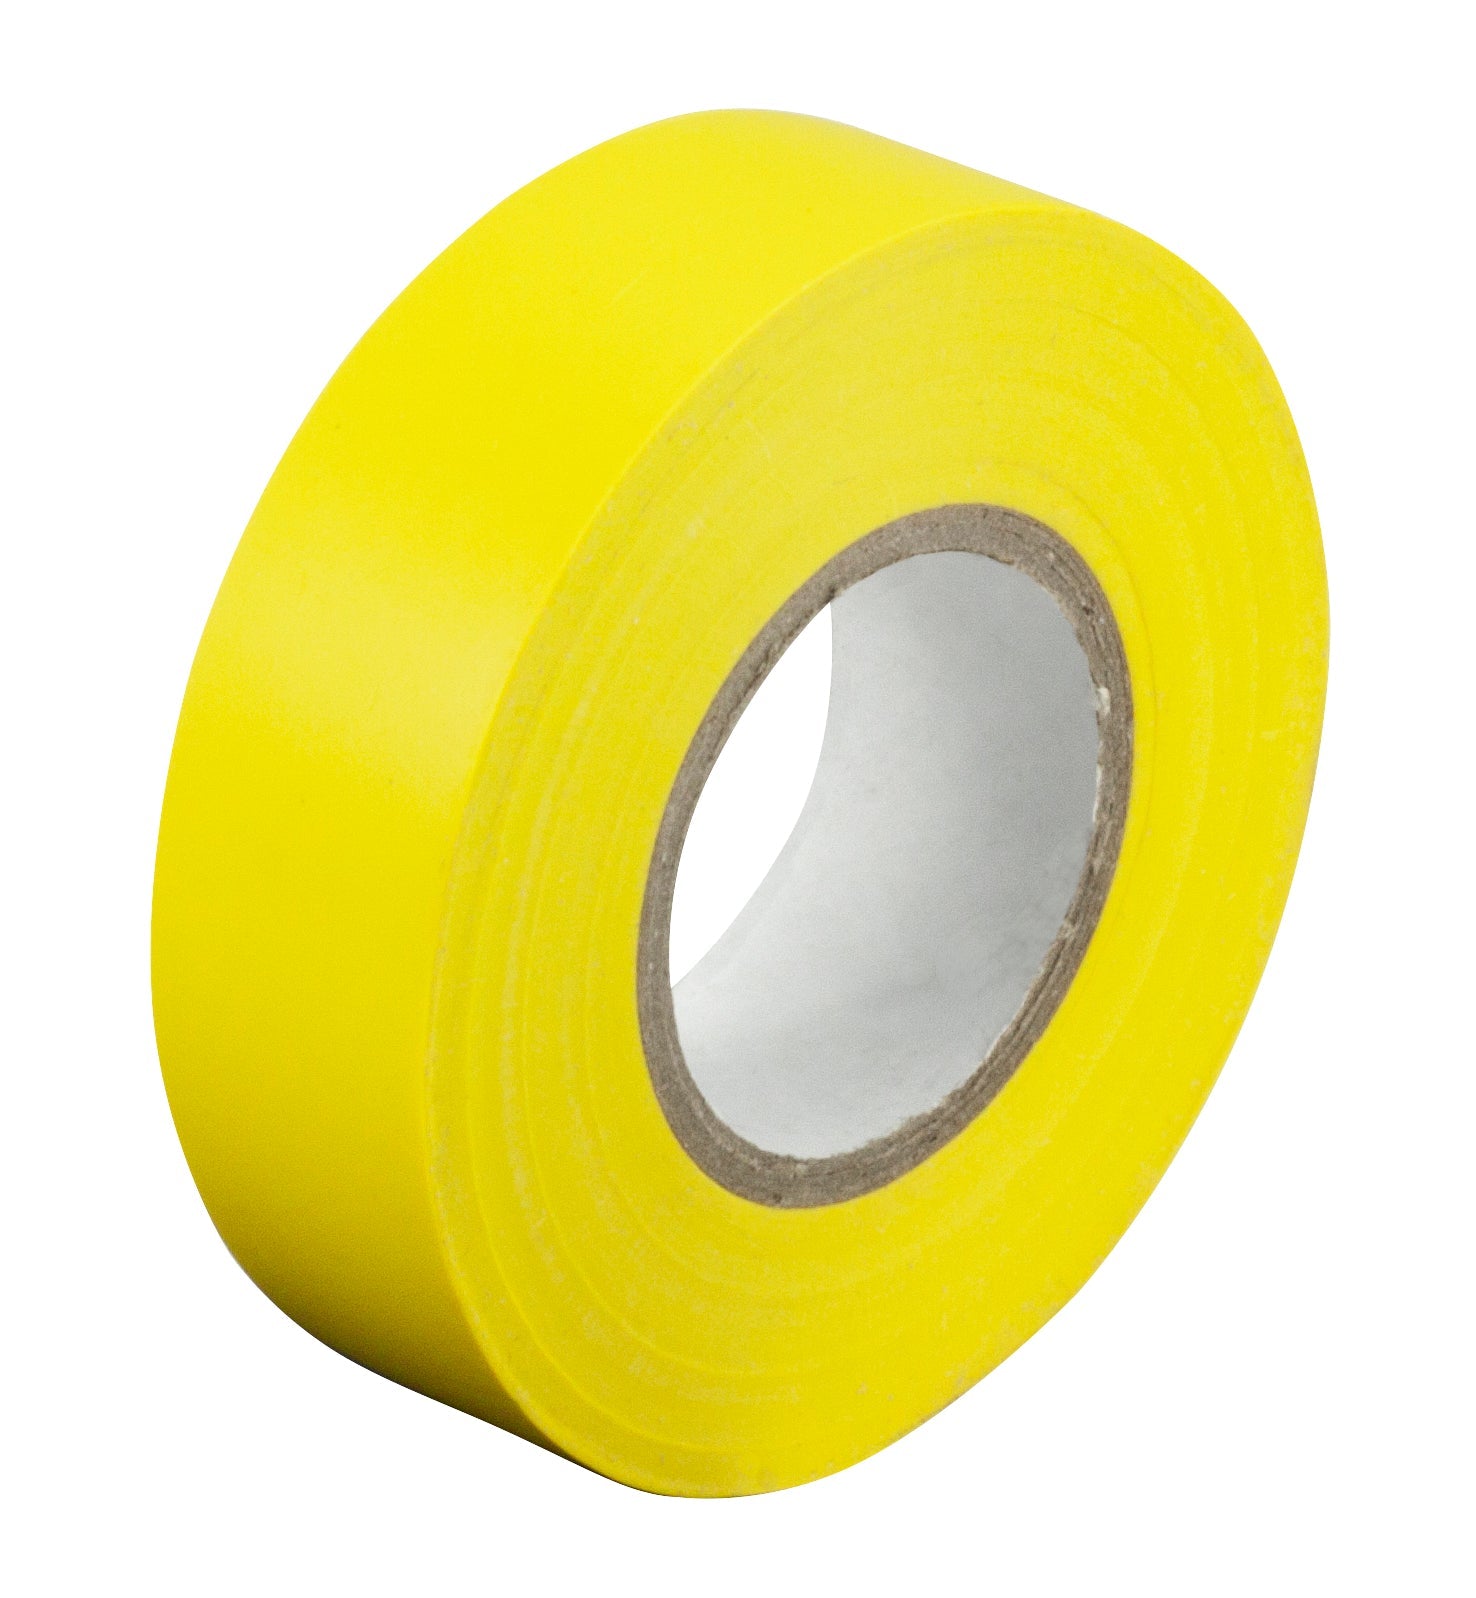 PVC Tape Size: 19mmx20m Roll - Yellow - Pack of 10